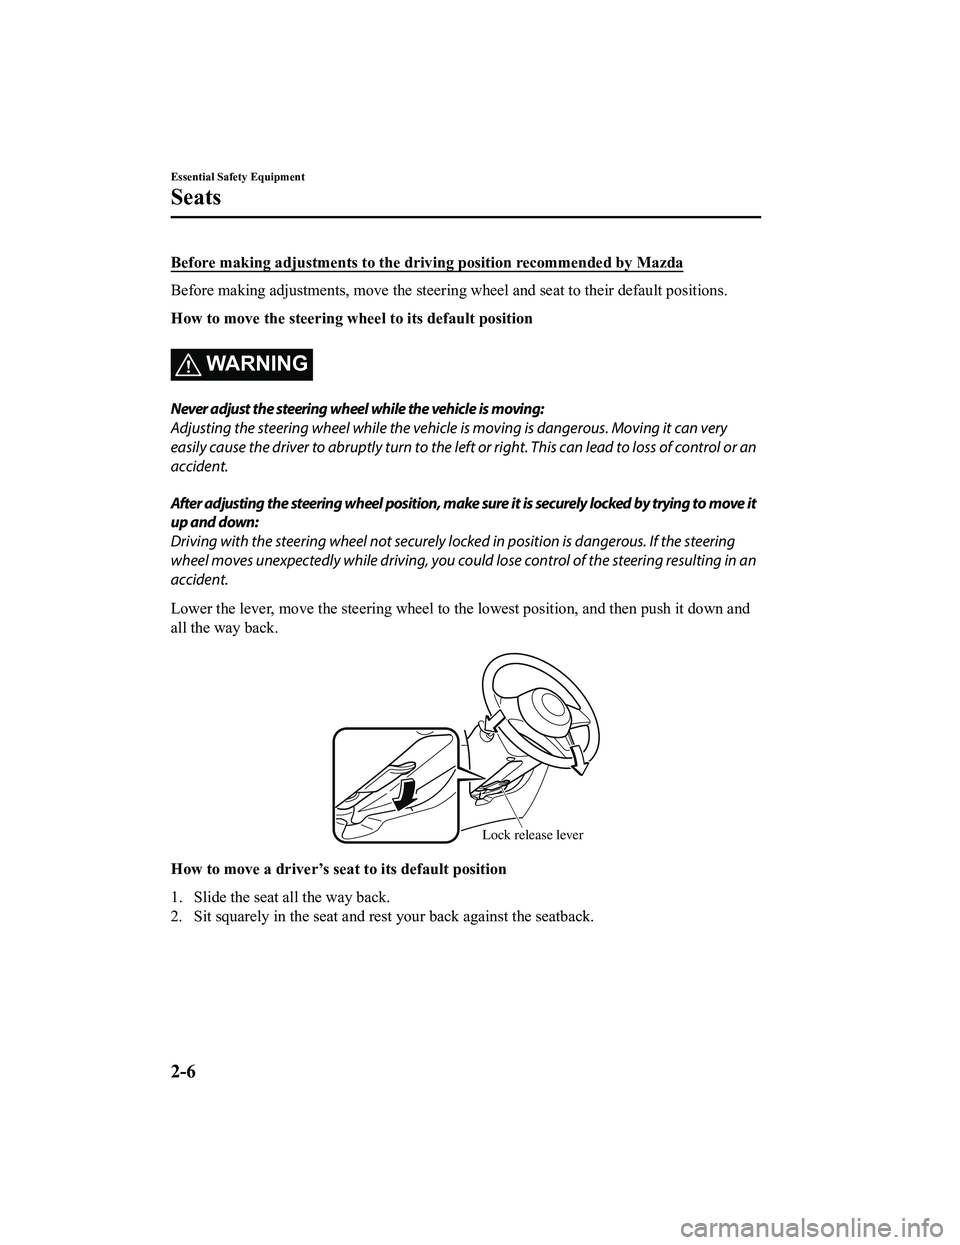 MAZDA MODEL MX-5 MIATA 2022  Owners Manual Before making adjustments to the driving position recommended by Mazda
Before making adjustments, move the steering wheel and seat to their default positions.
How to move the steering wheel to its def